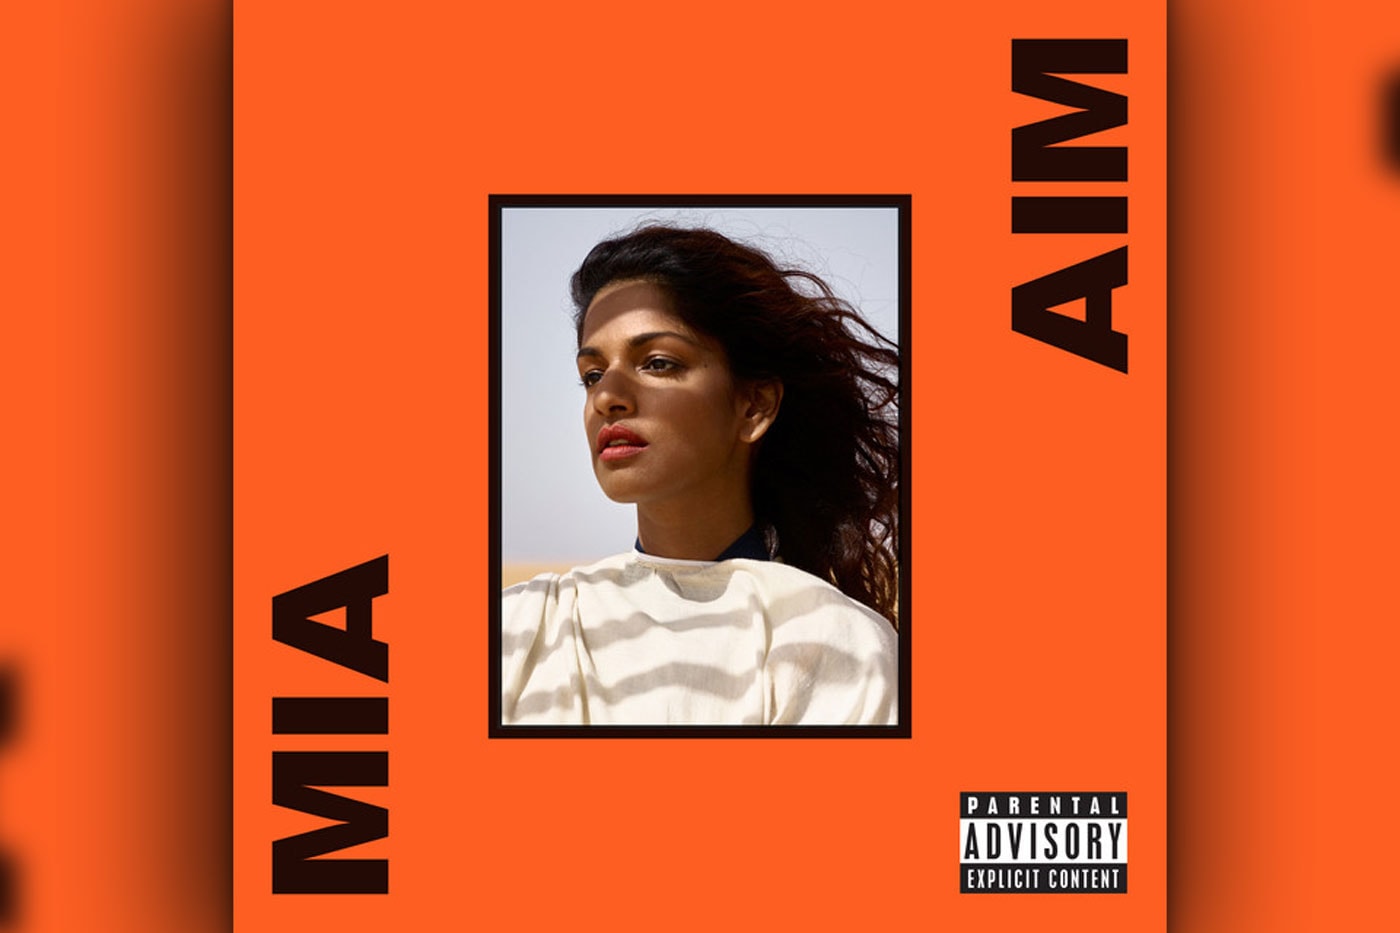 M.I.A. & Dexta Daps Connect for "Foreign Friend"